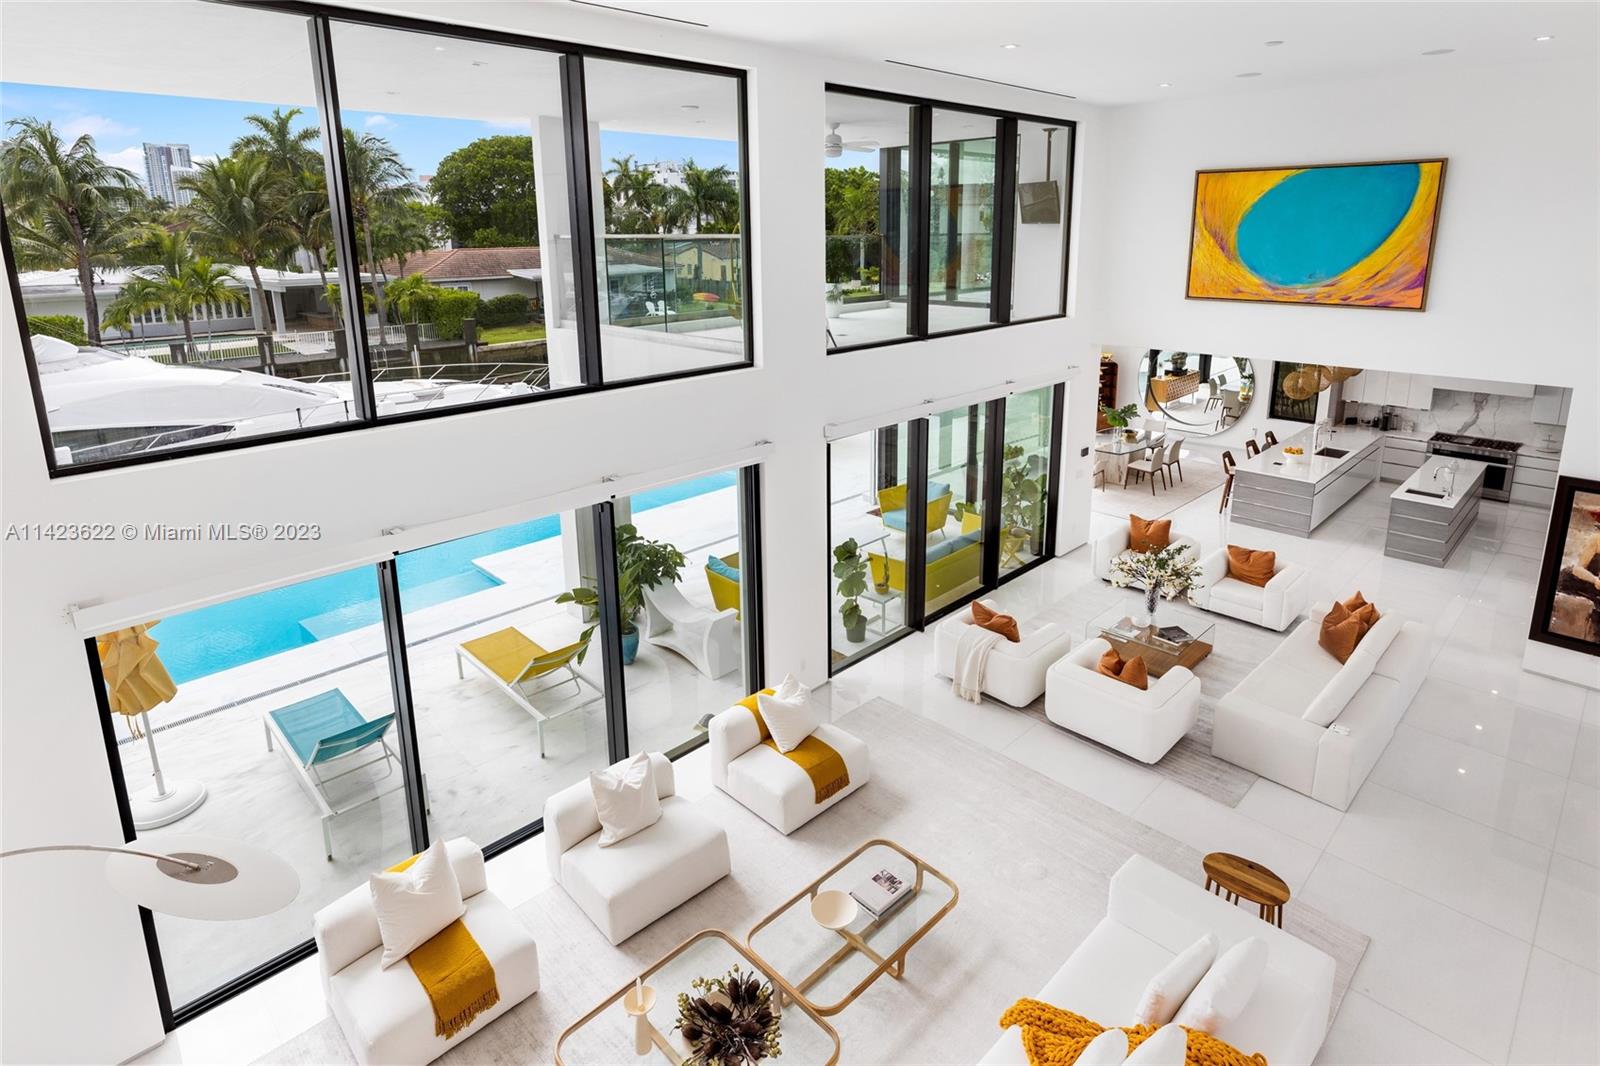 This masterfully designed, brand new construction modern waterfront residence located in the desirable Las Olas Isles showcases seamless indoor-outdoor living and an exquisite blend of luxurious finishes throughout. Boasting 100 ft of waterfront with no fixed bridges, this impressive 3-story home is your gateway to the Floridian lifestyle. This waterfront estate features 8 bedrooms, 8 full bathrooms and 1 half bath, 8,880 square feet of living all on a 10,500 square foot lot.